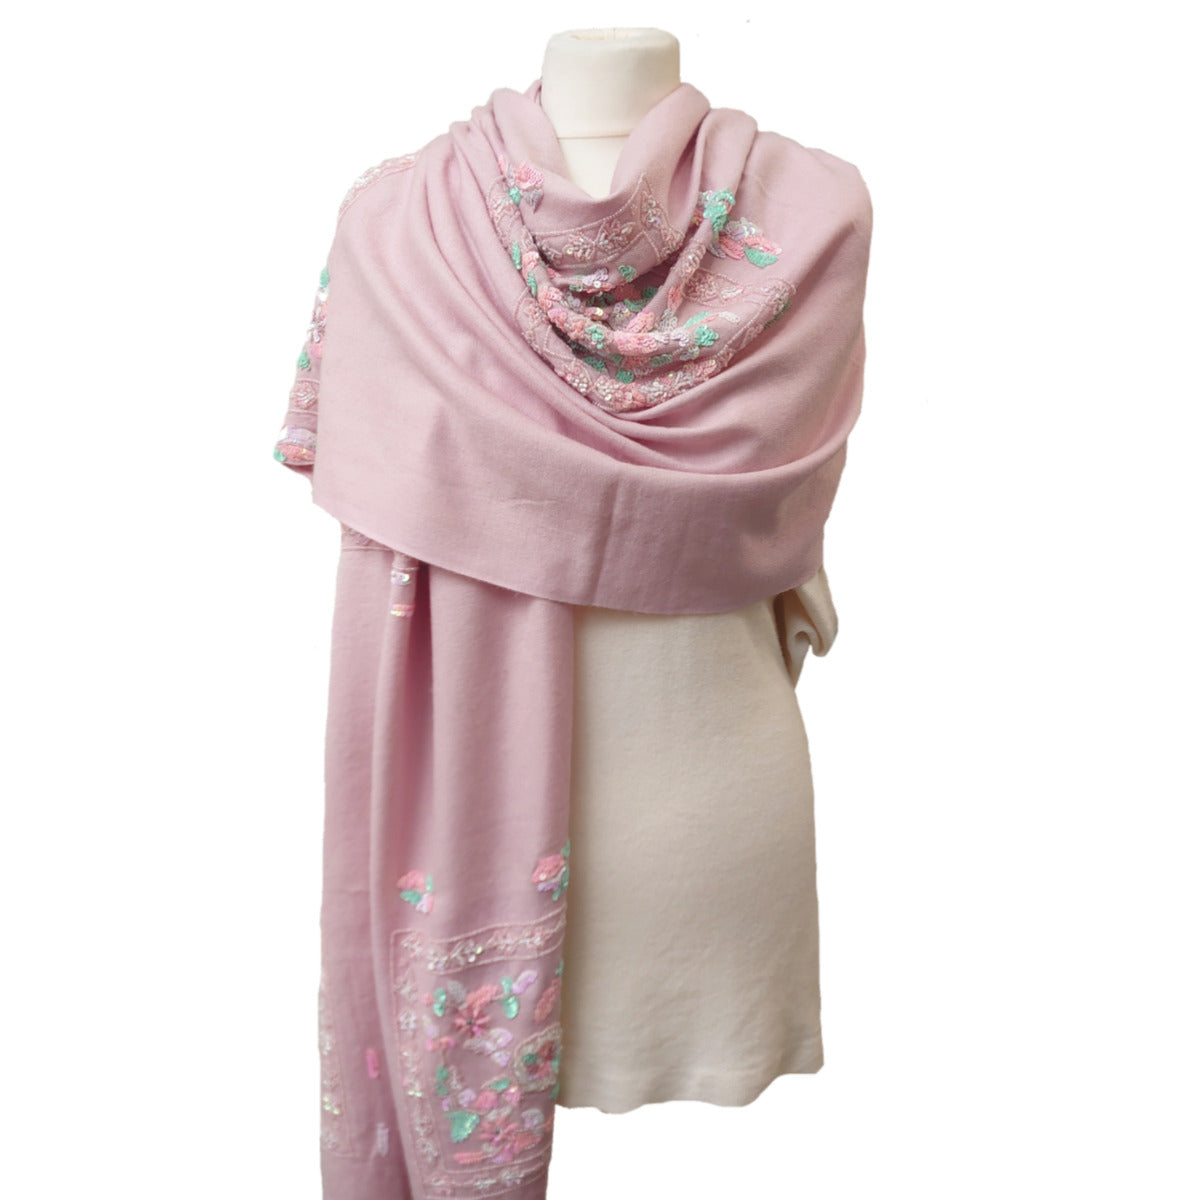 Exclusive Luxury Pashmina With Beaded Design - Pale Pink